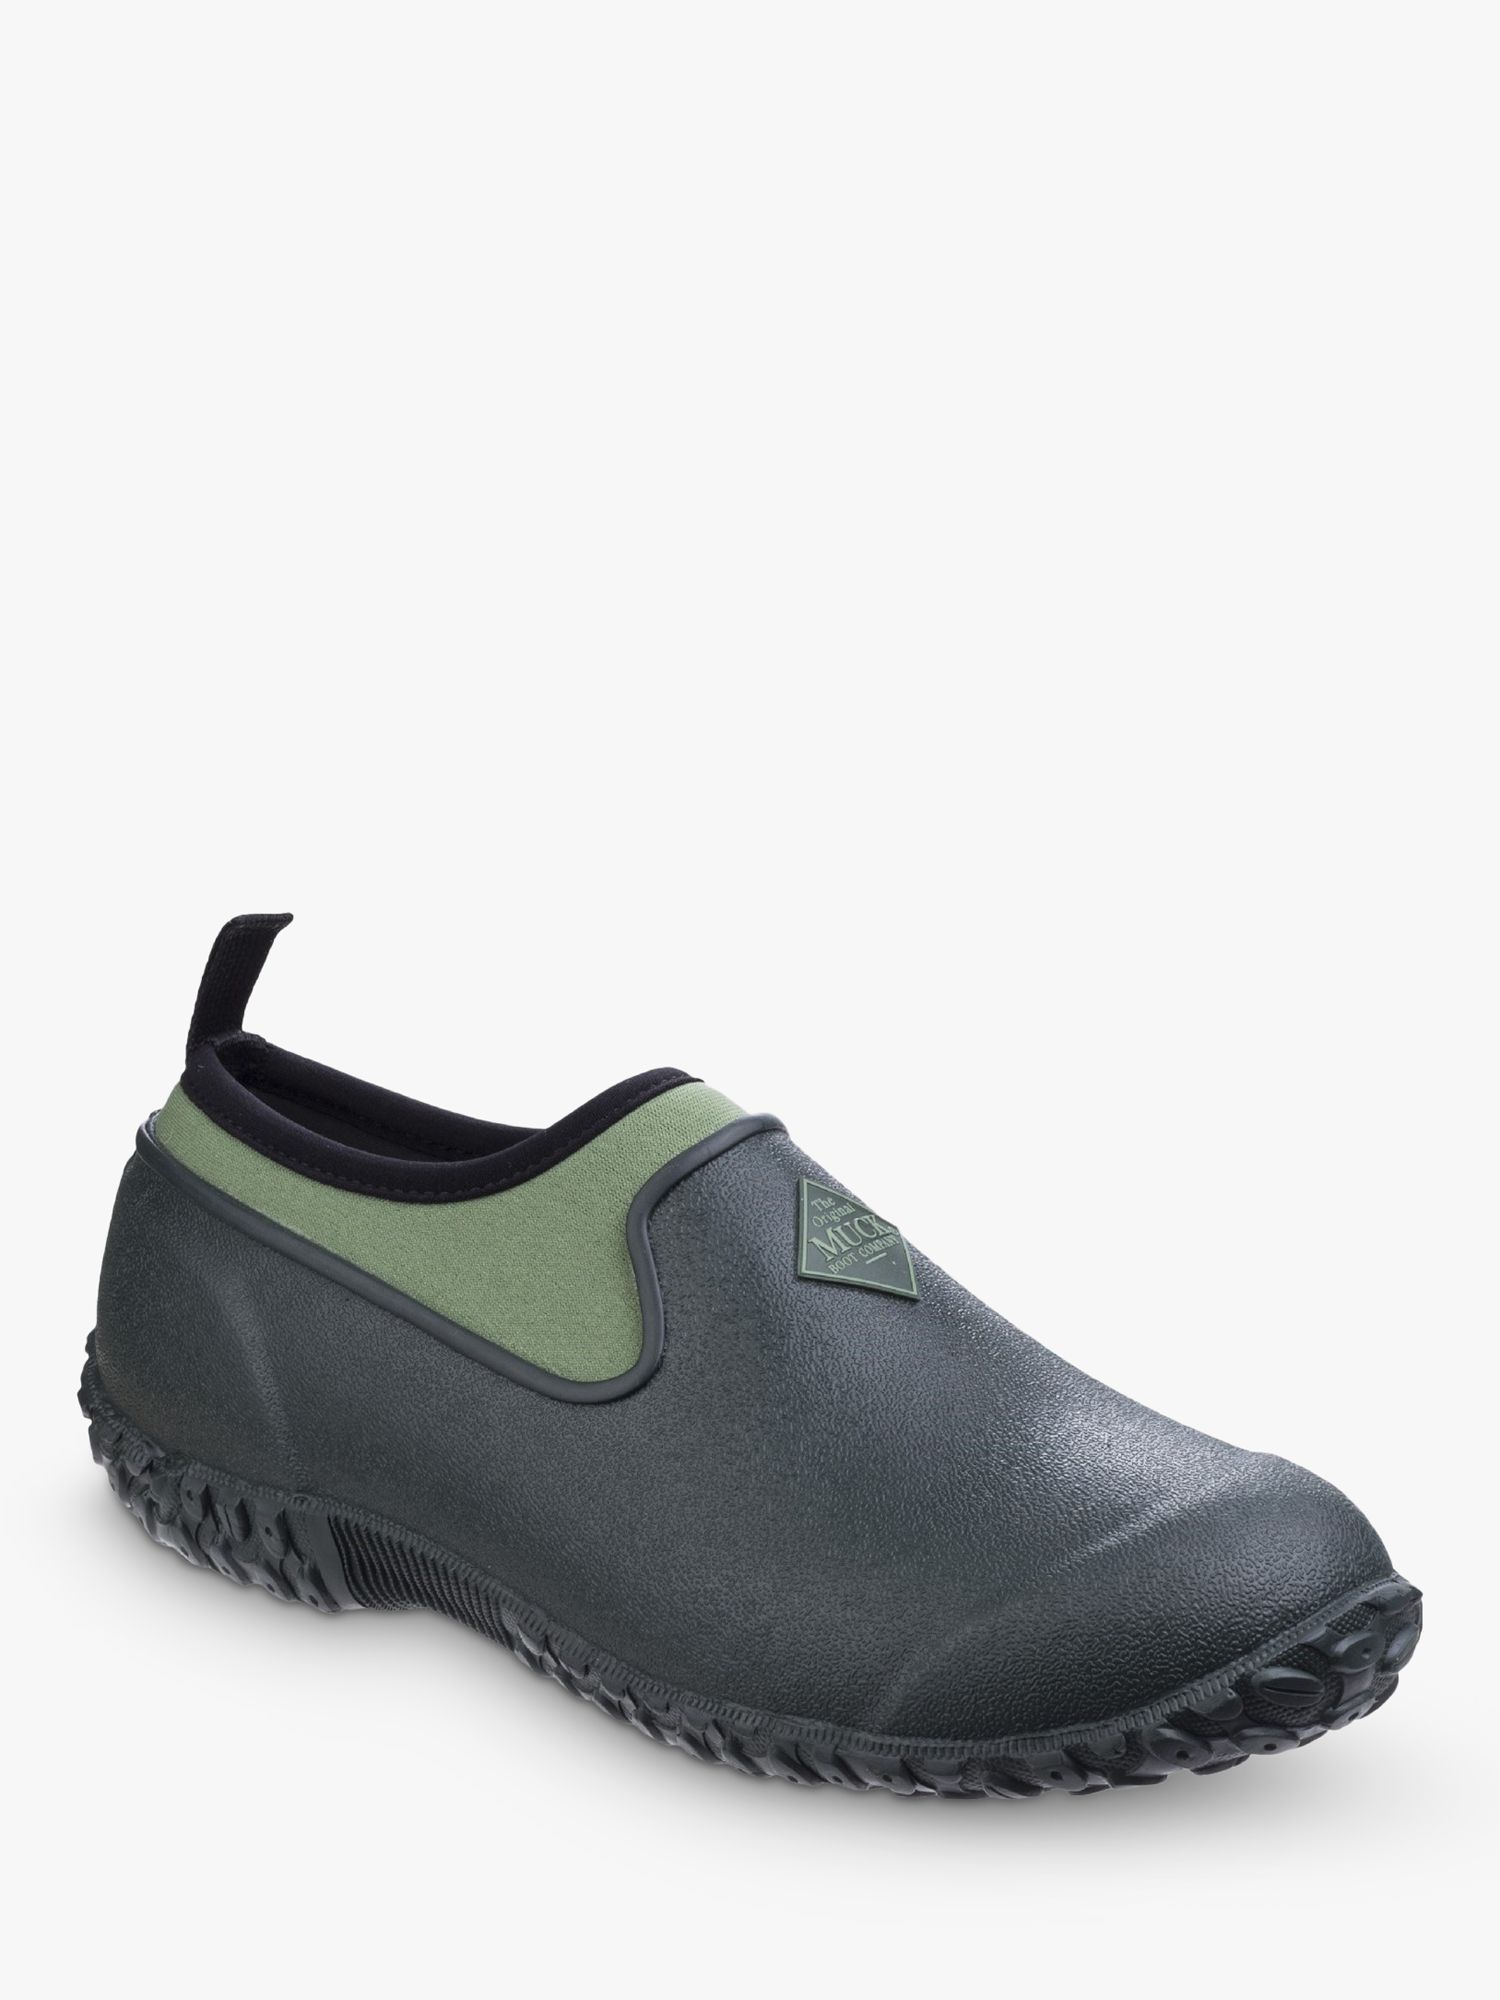 Muck Muckster II Low All Purpose Shoe Boots, Green at John Lewis & Partners